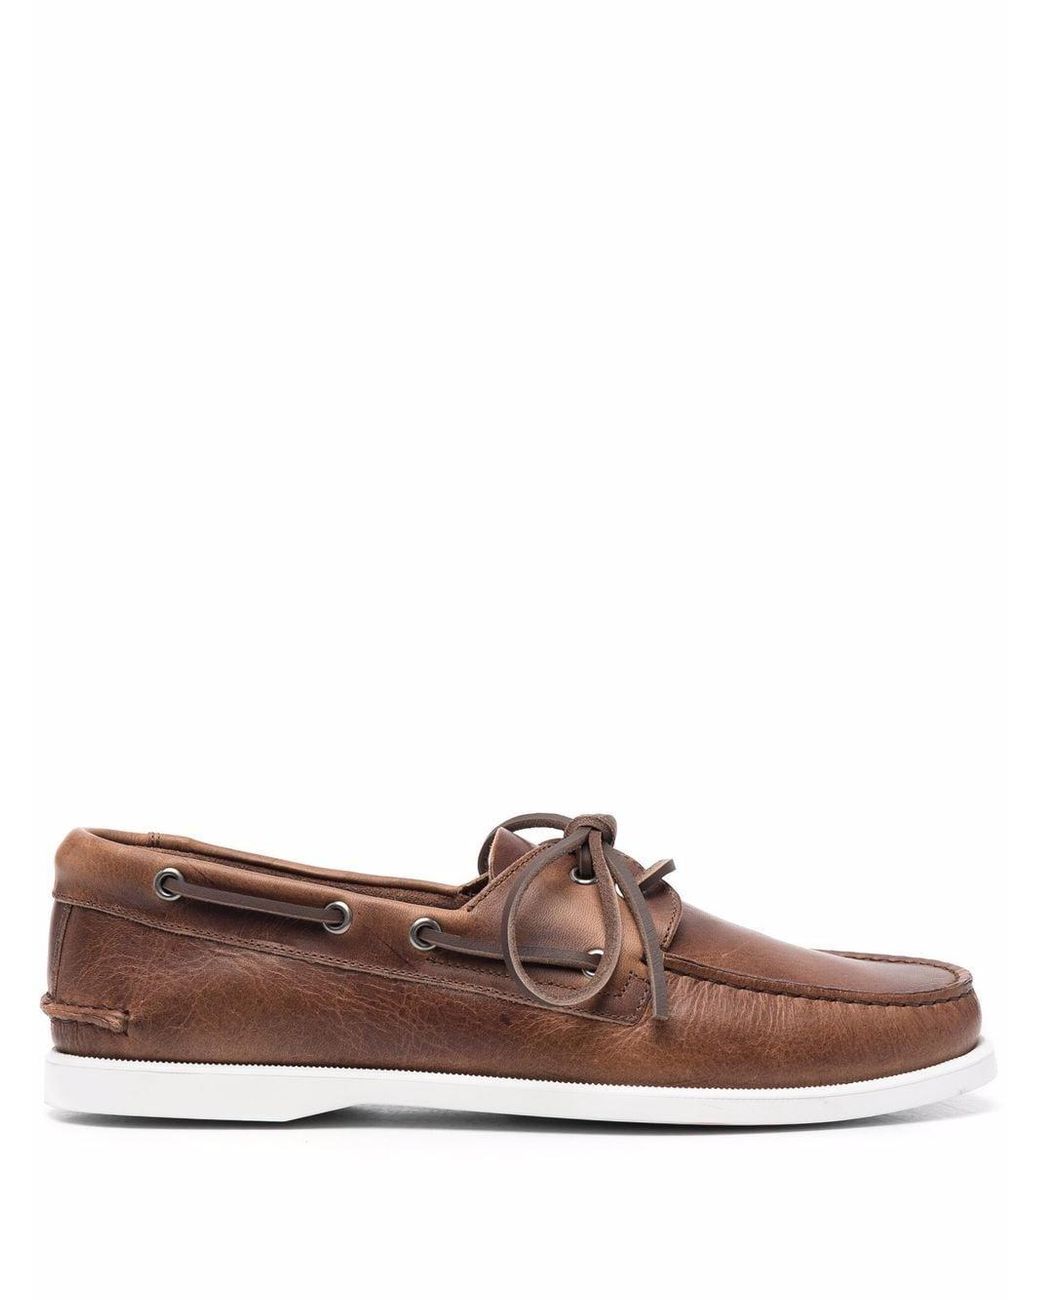 SCAROSSO Orlando Boat Shoes in Brown for Men - Lyst